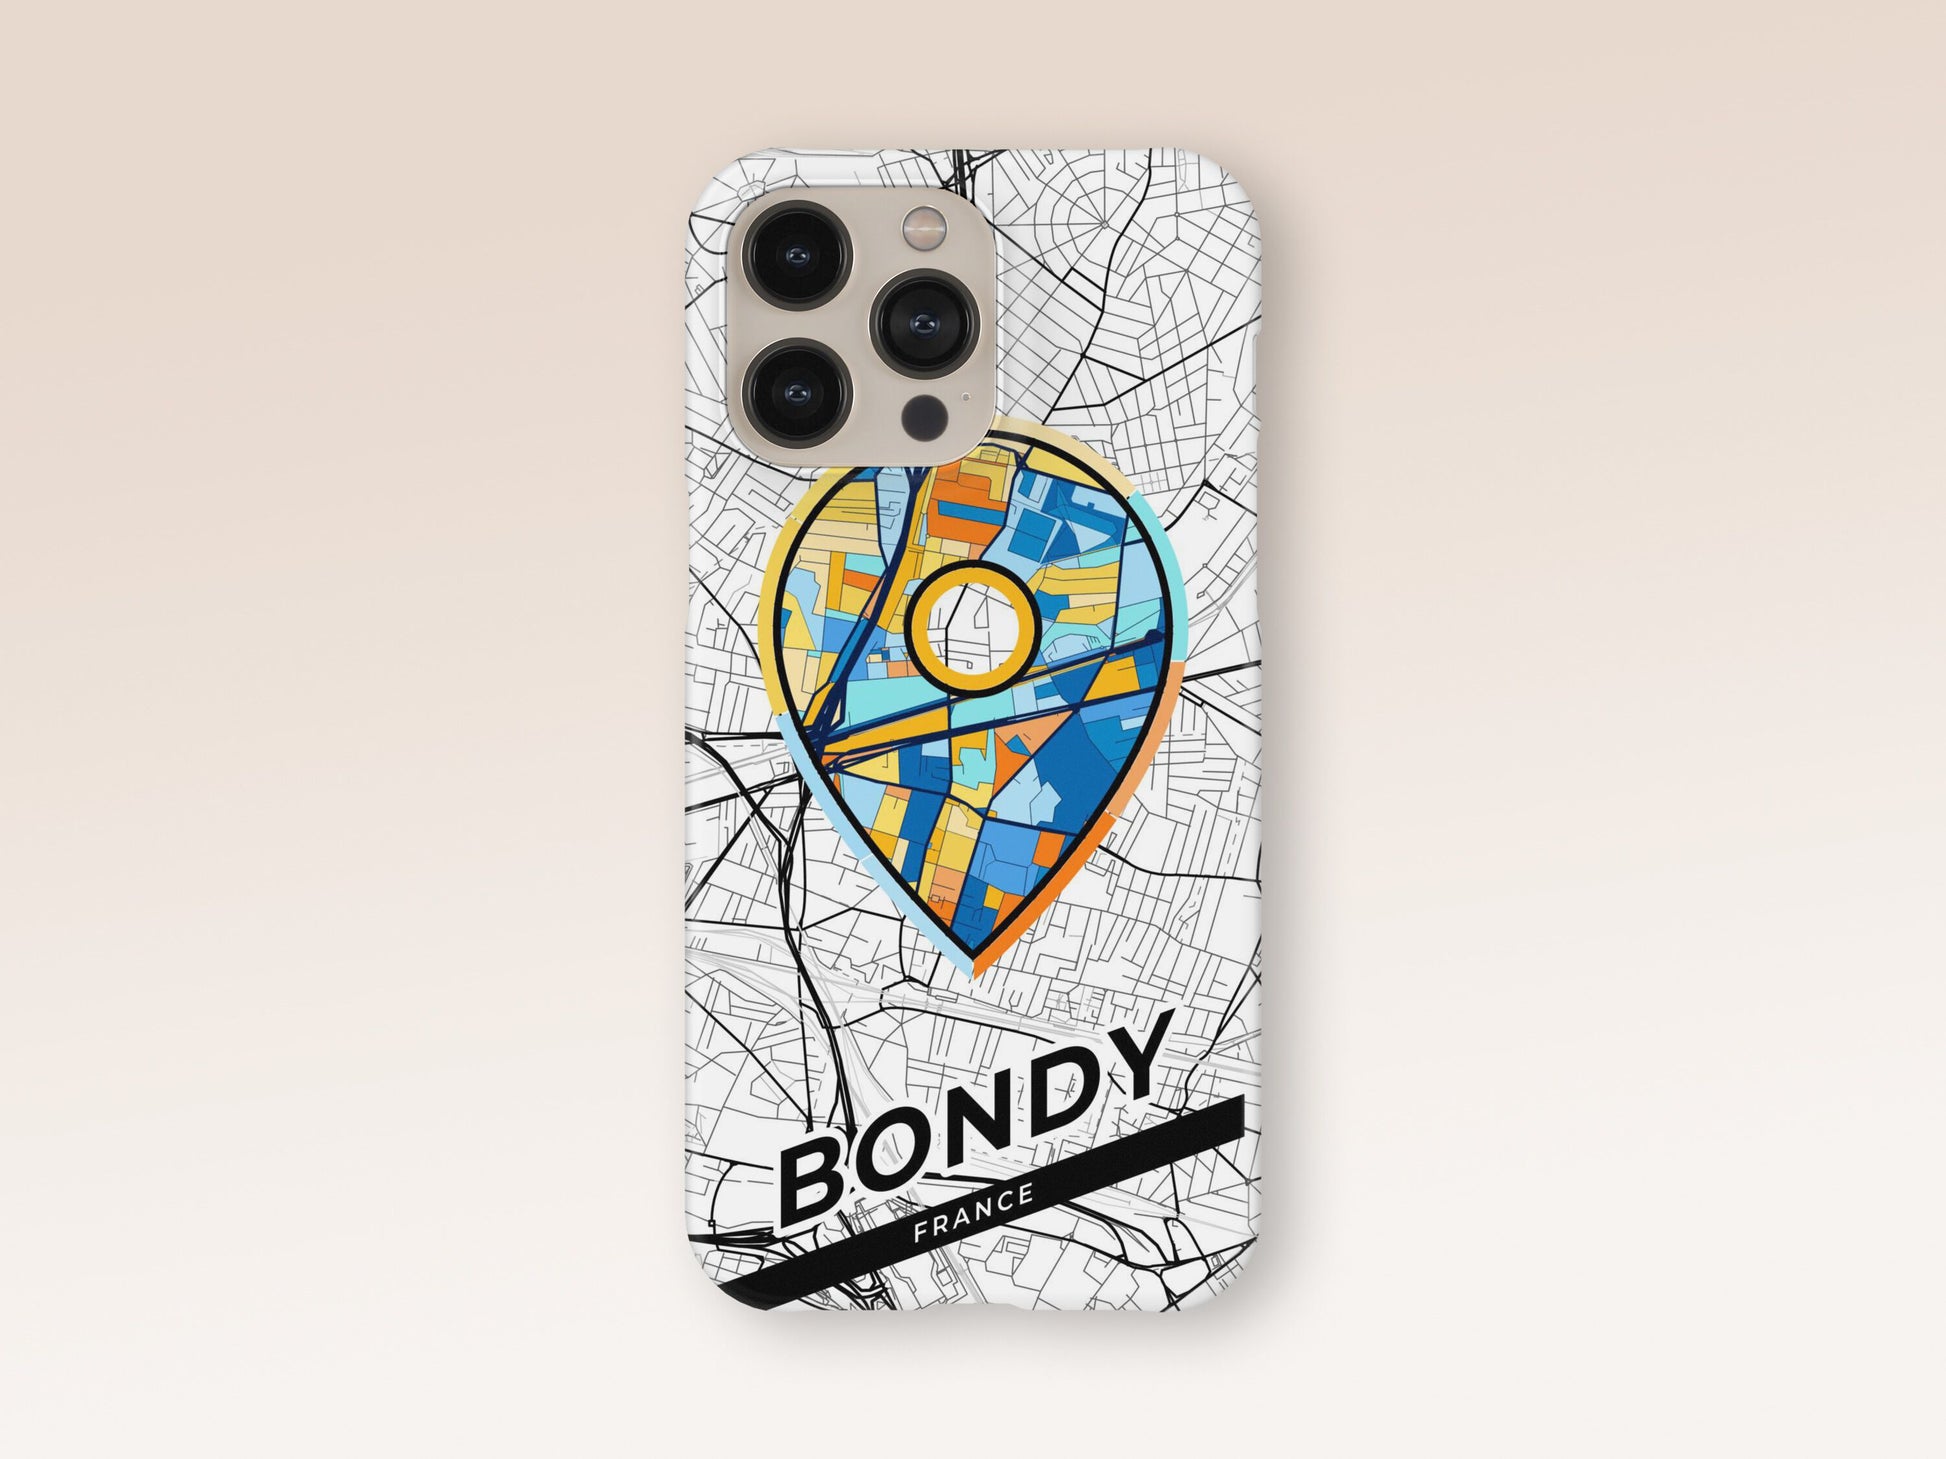 Bondy France slim phone case with colorful icon. Birthday, wedding or housewarming gift. Couple match cases. 1